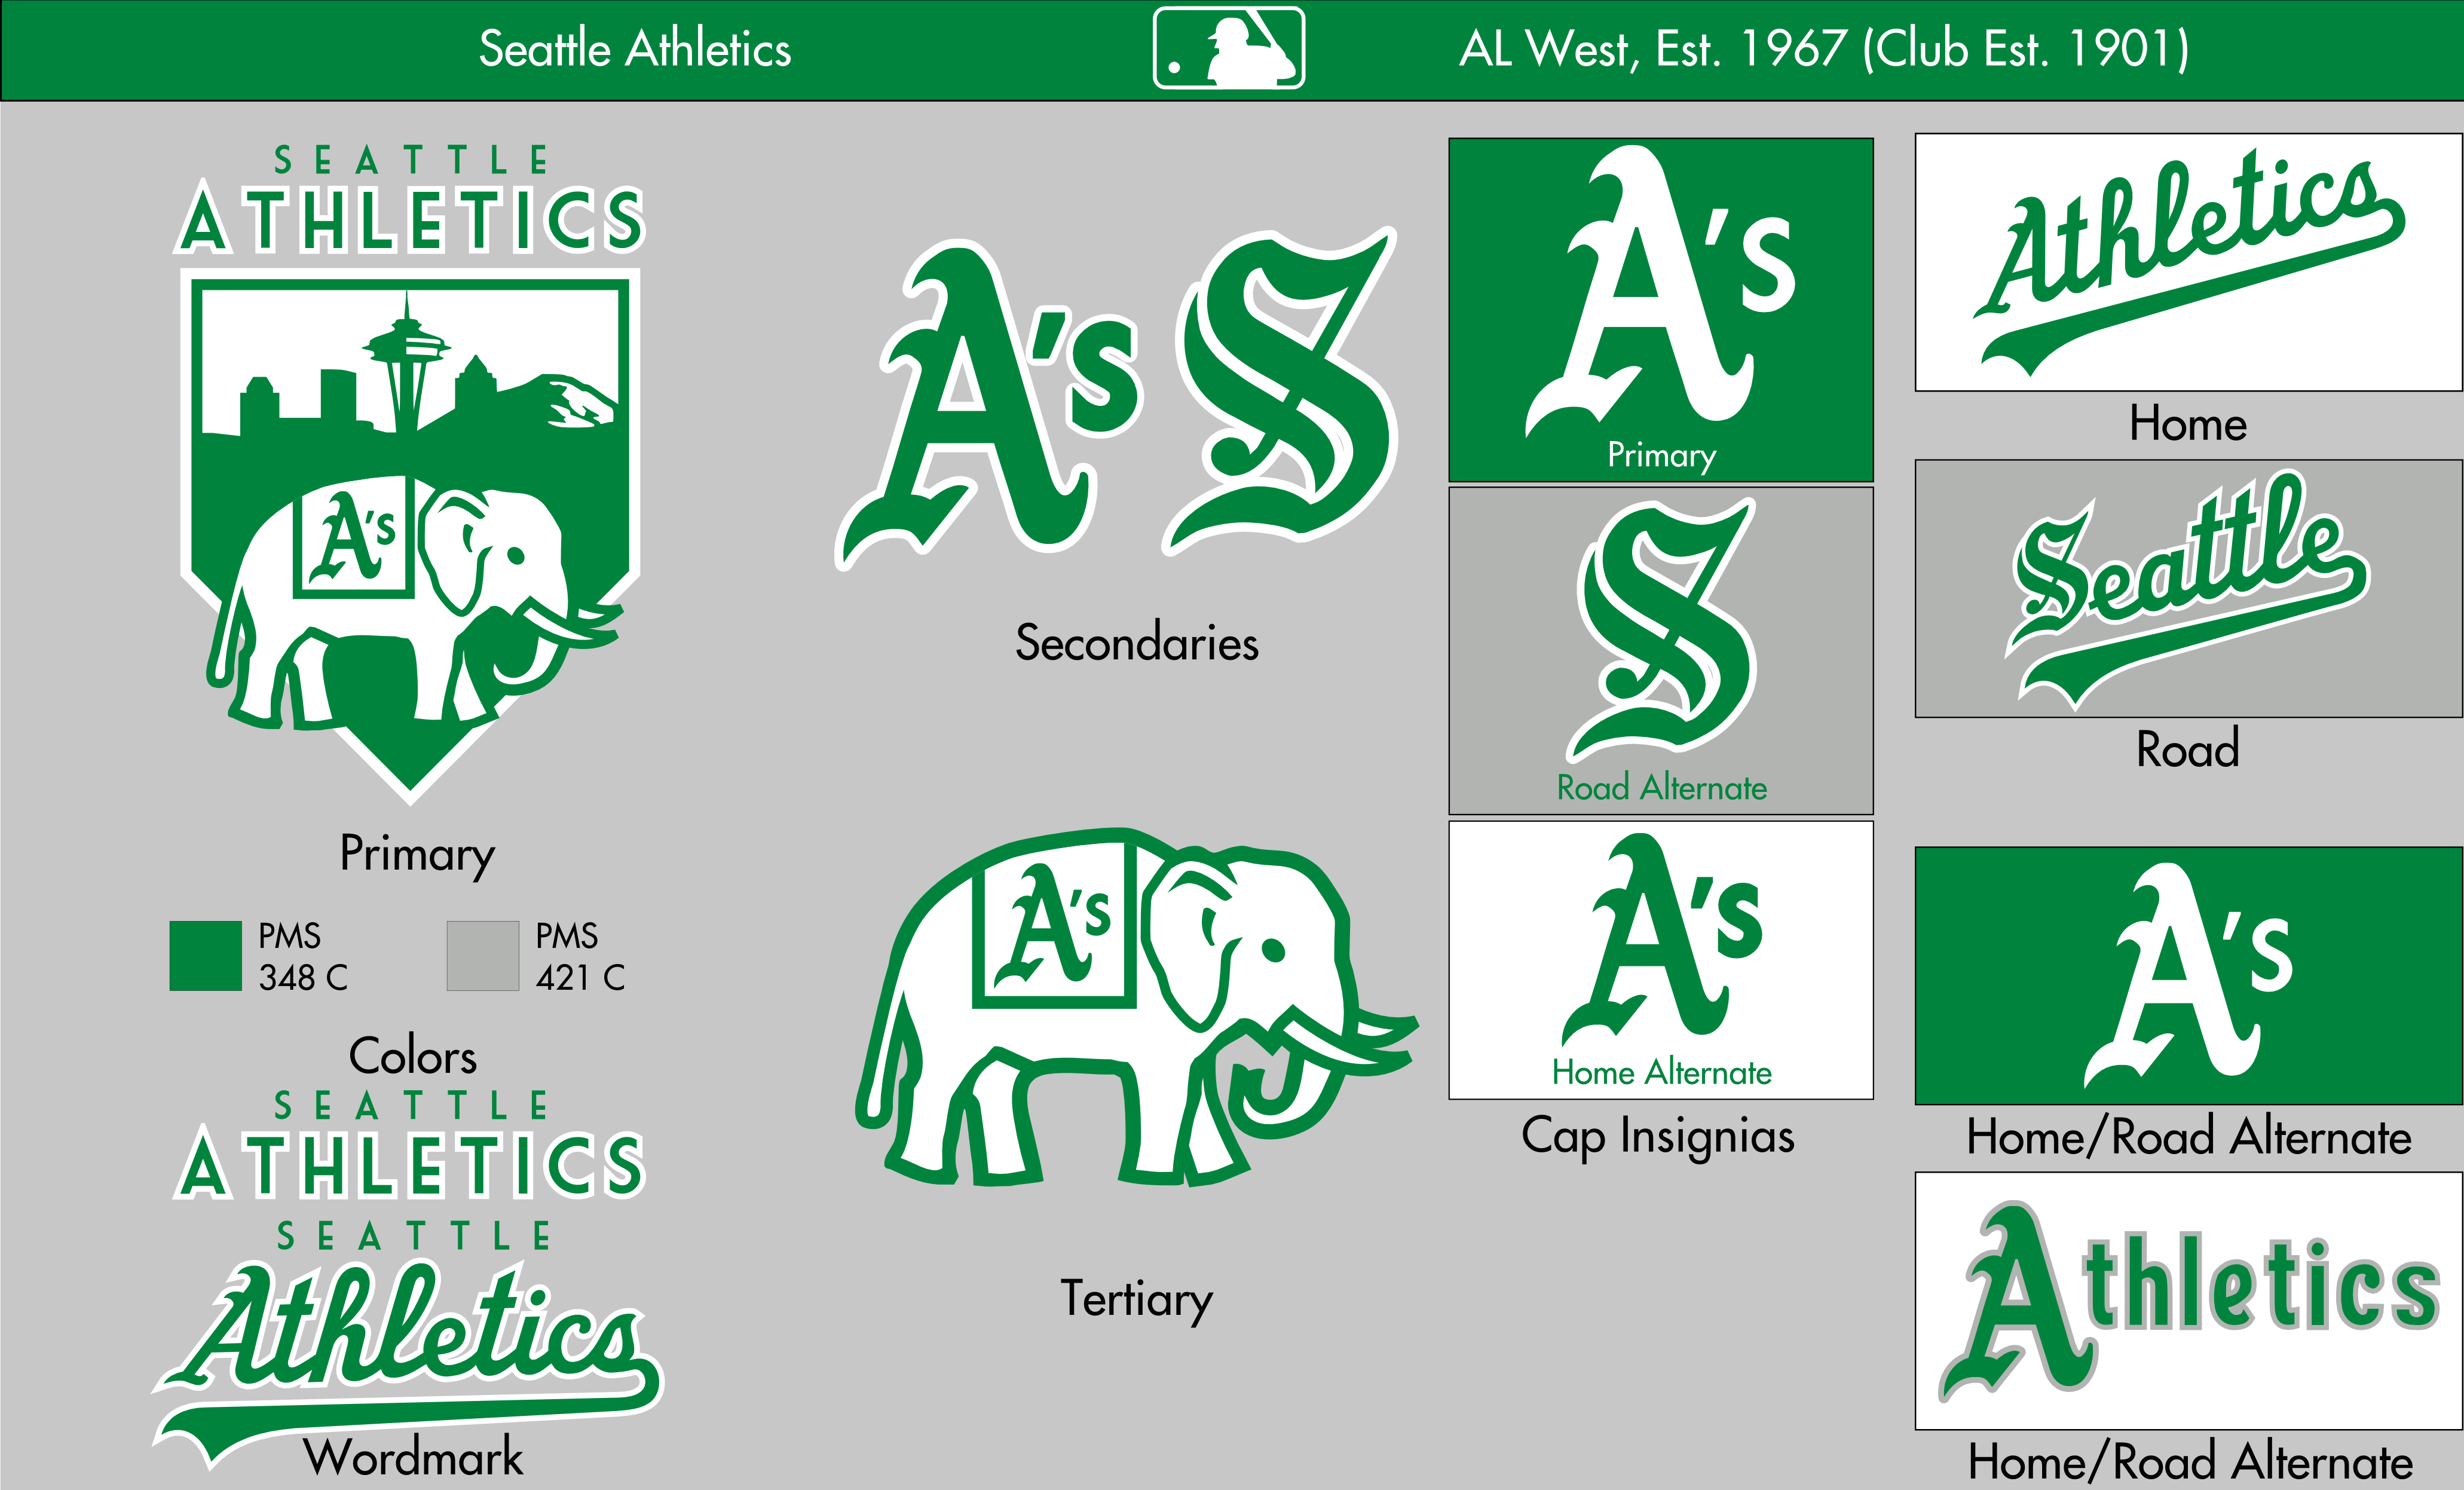 White and Green Block Logo - MLB: The Defunct Saga - Milwaukee White Sox and Brewers Prototypes ...